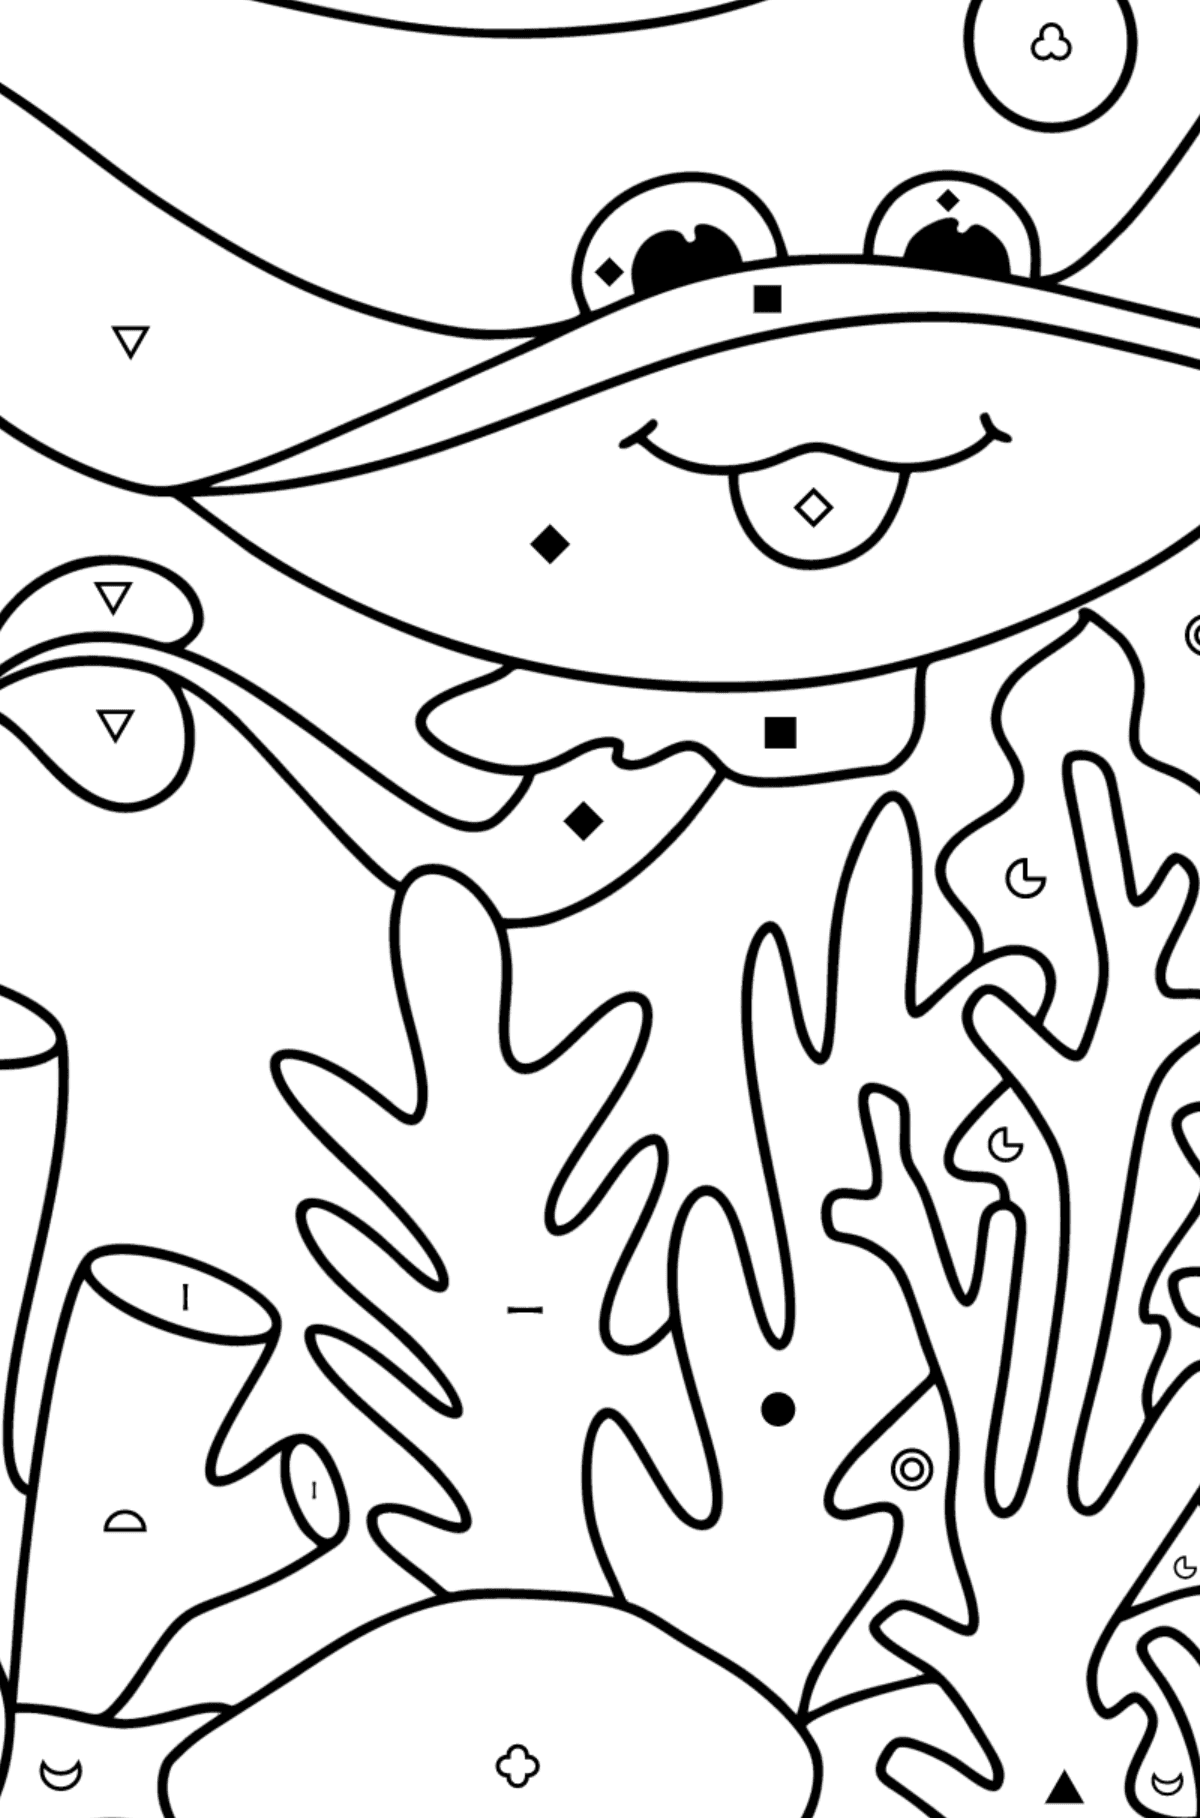 Stingray coloring page - Coloring by Symbols and Geometric Shapes for Kids